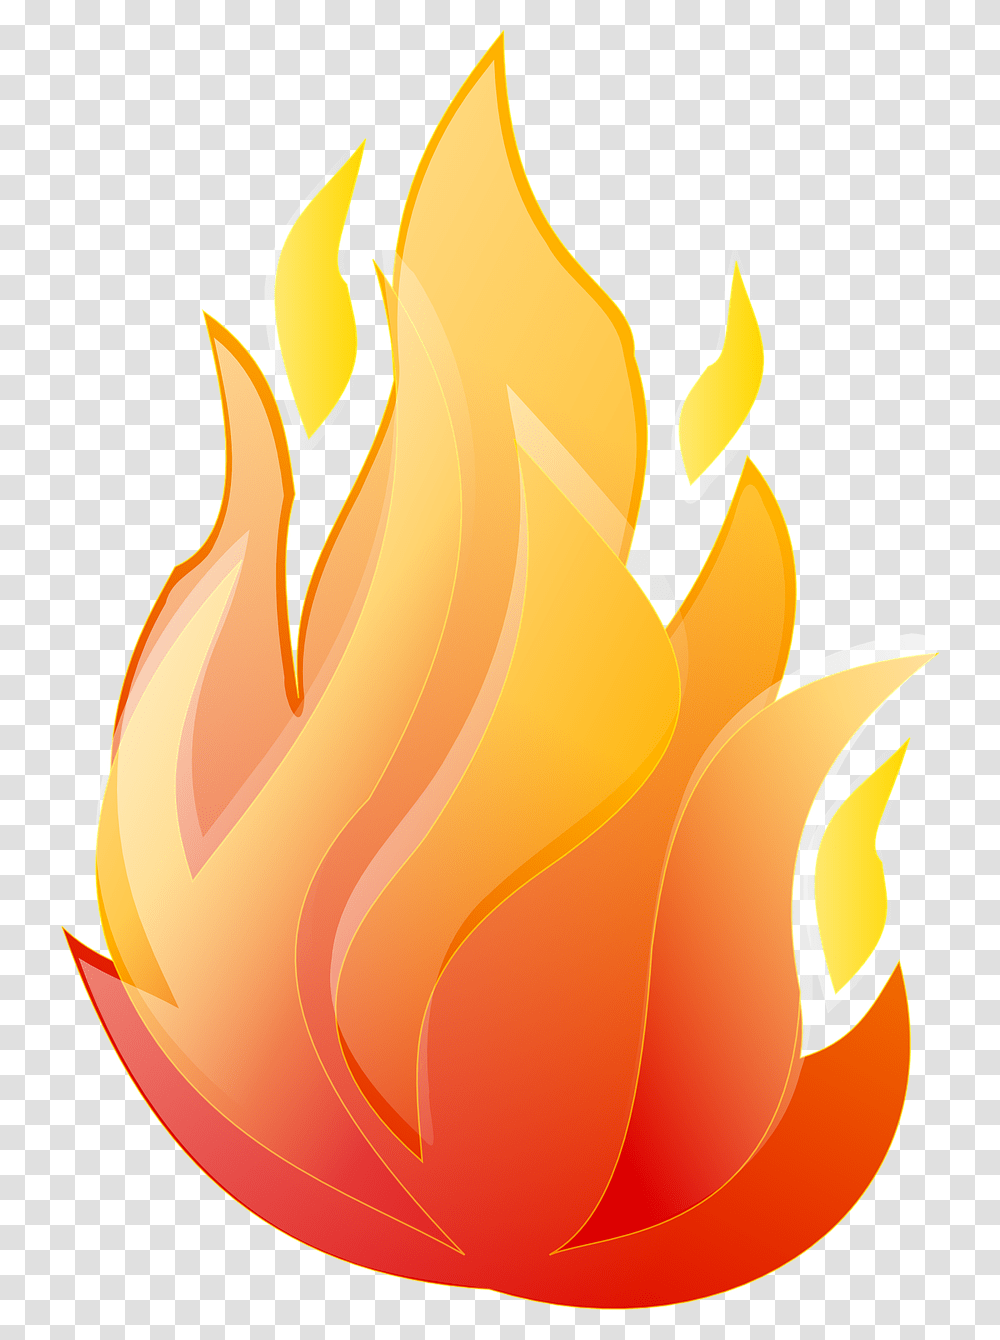 Free Fire Vector Download Animated Background Fire, Flame, Bonfire Transparent Png